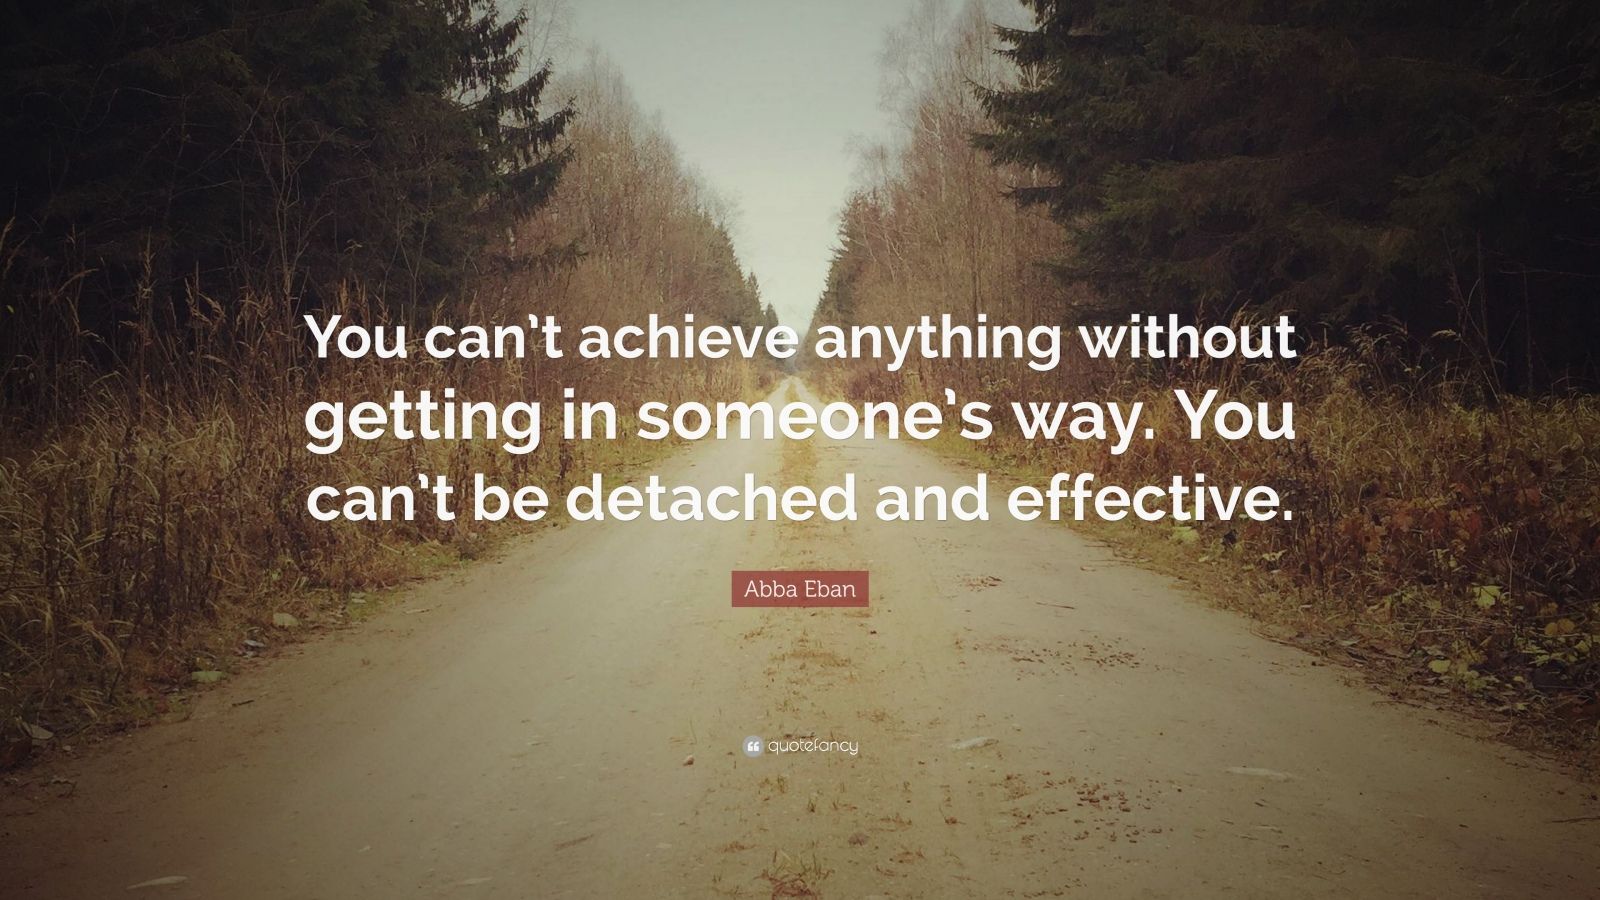 Abba Eban Quote: “You can’t achieve anything without getting in someone ...